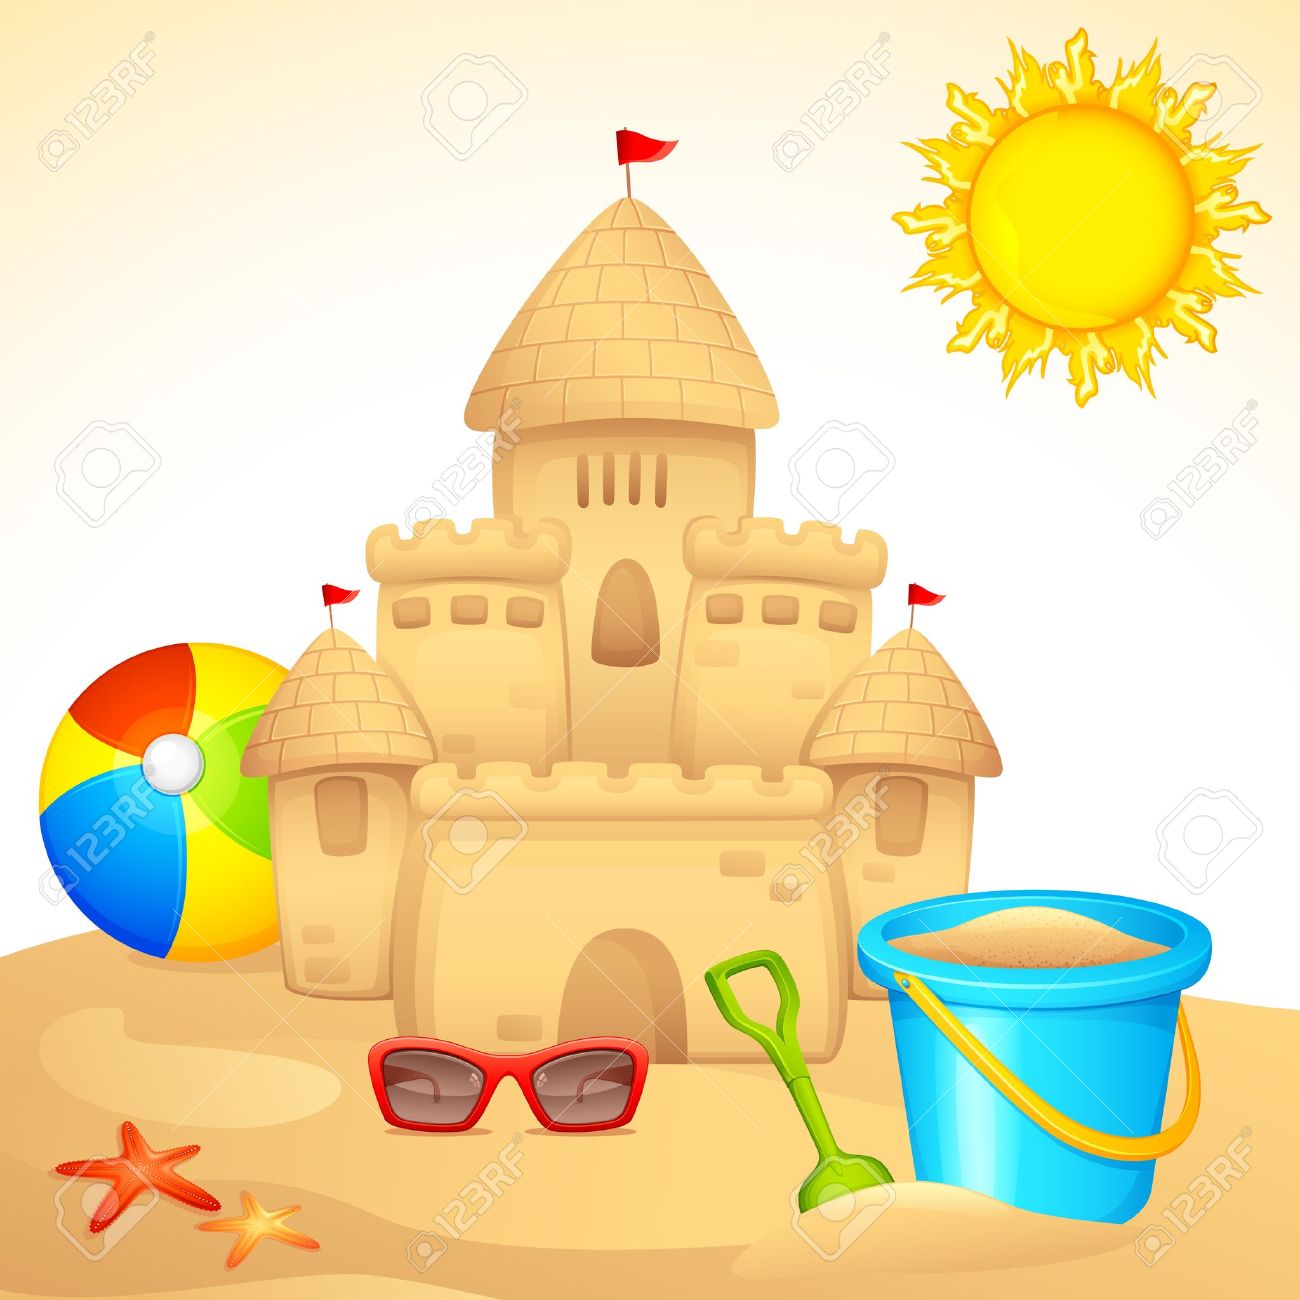 Sand sculptures clipart 20 free Cliparts | Download images on